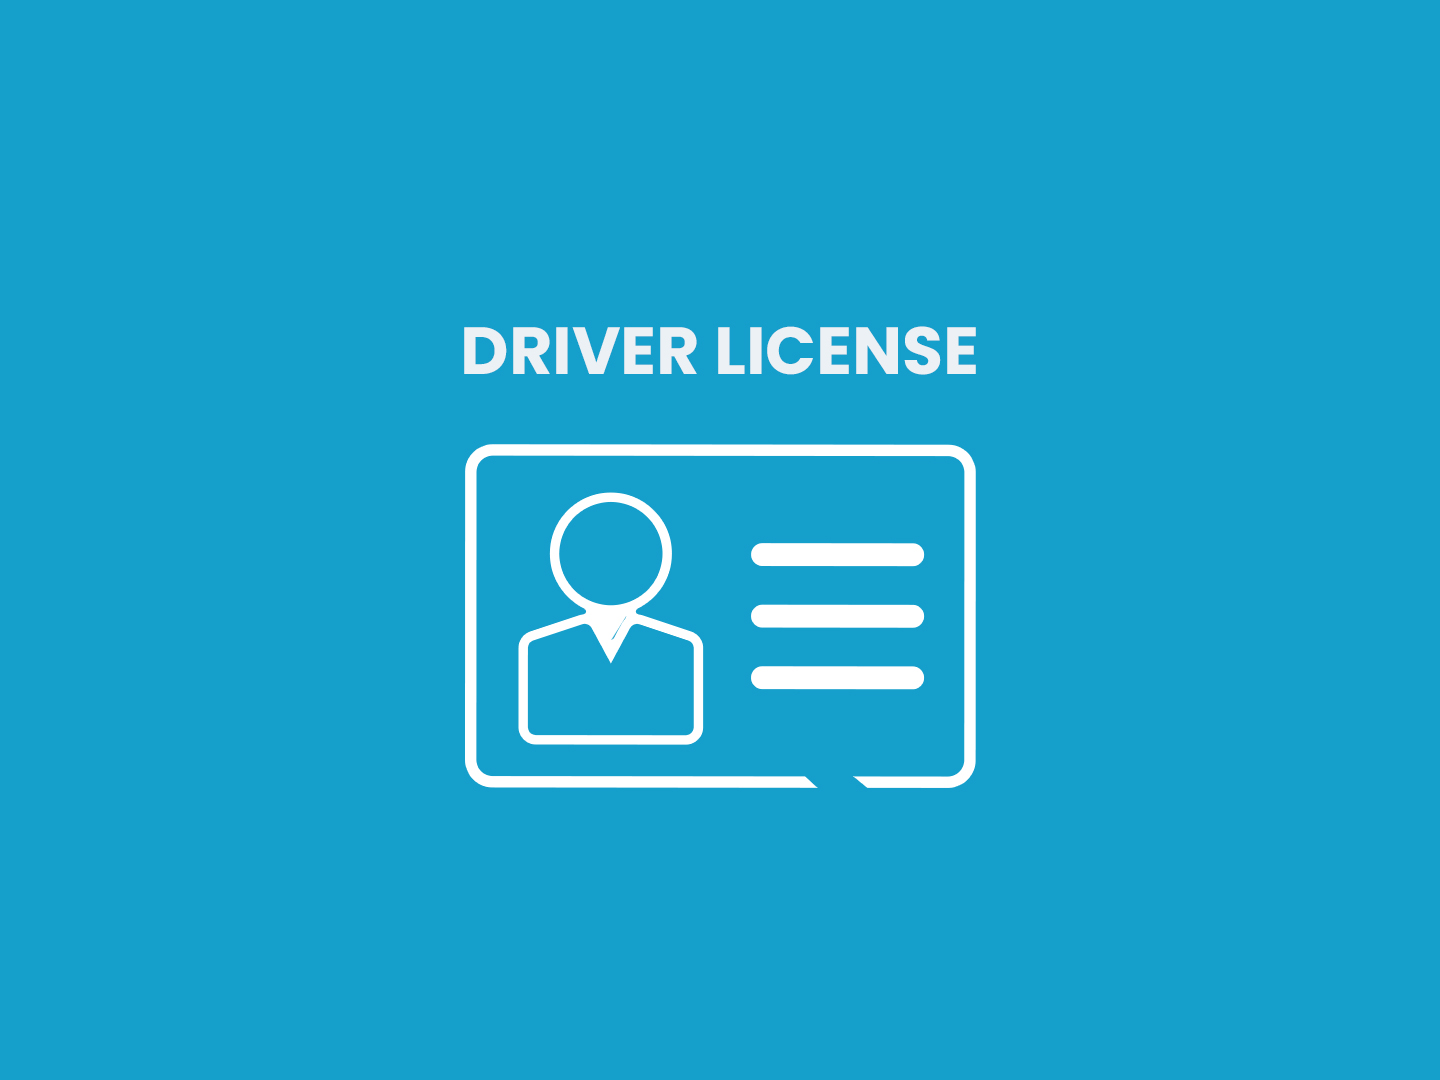 How to get a driver’s license in UAE